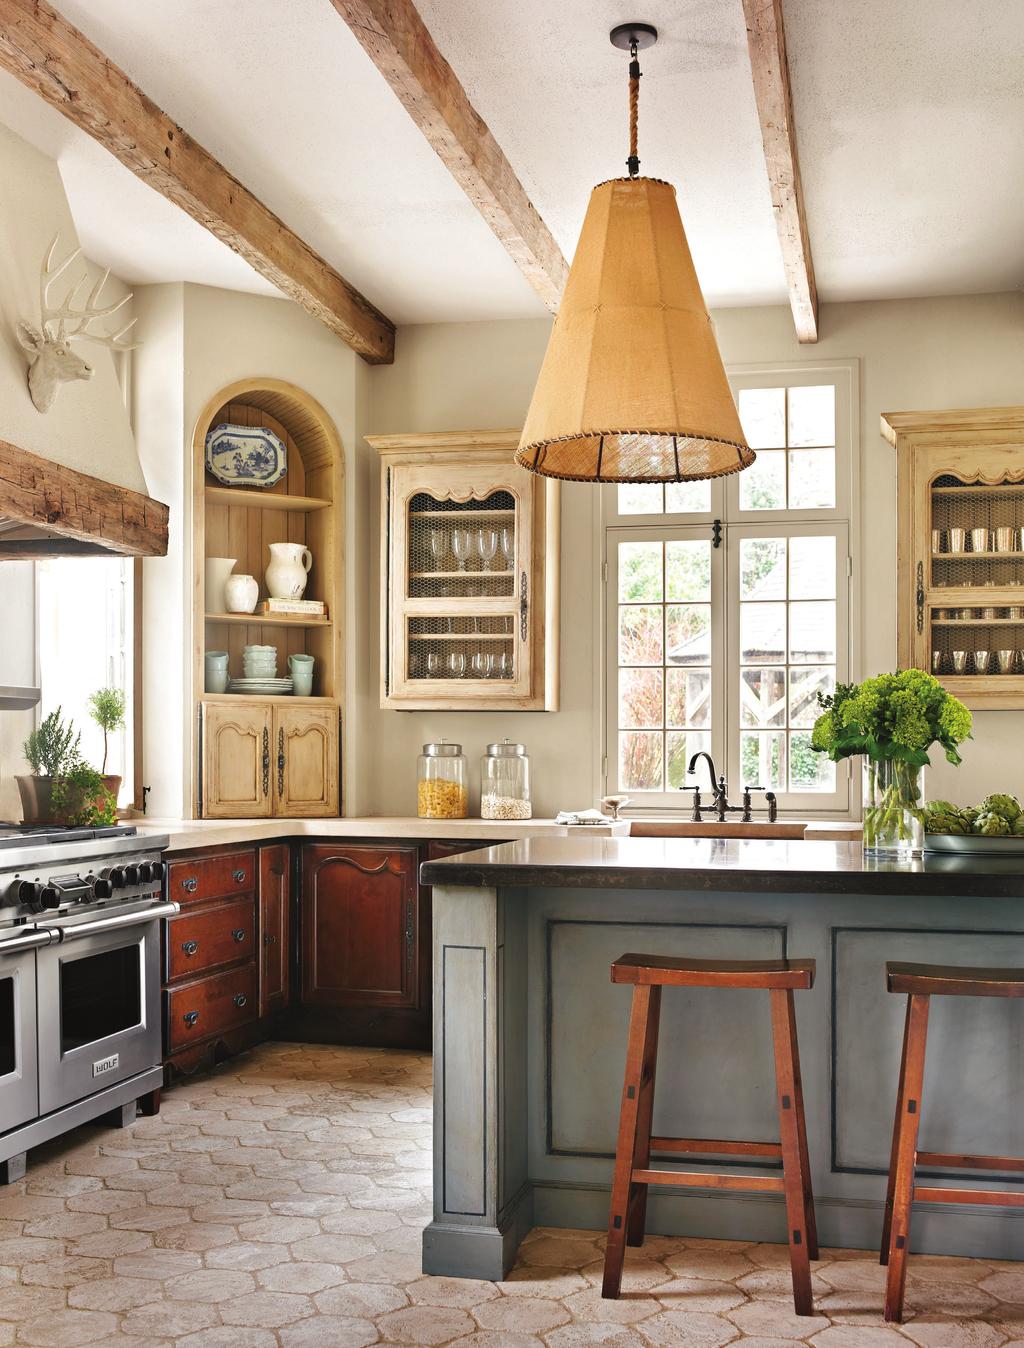 THIS PHOTO: Reclaimedwood ceiling beams, glazed upper cabinets with chicken-wire insets, and limestone countertops lend patina to the remodeled kitchen.